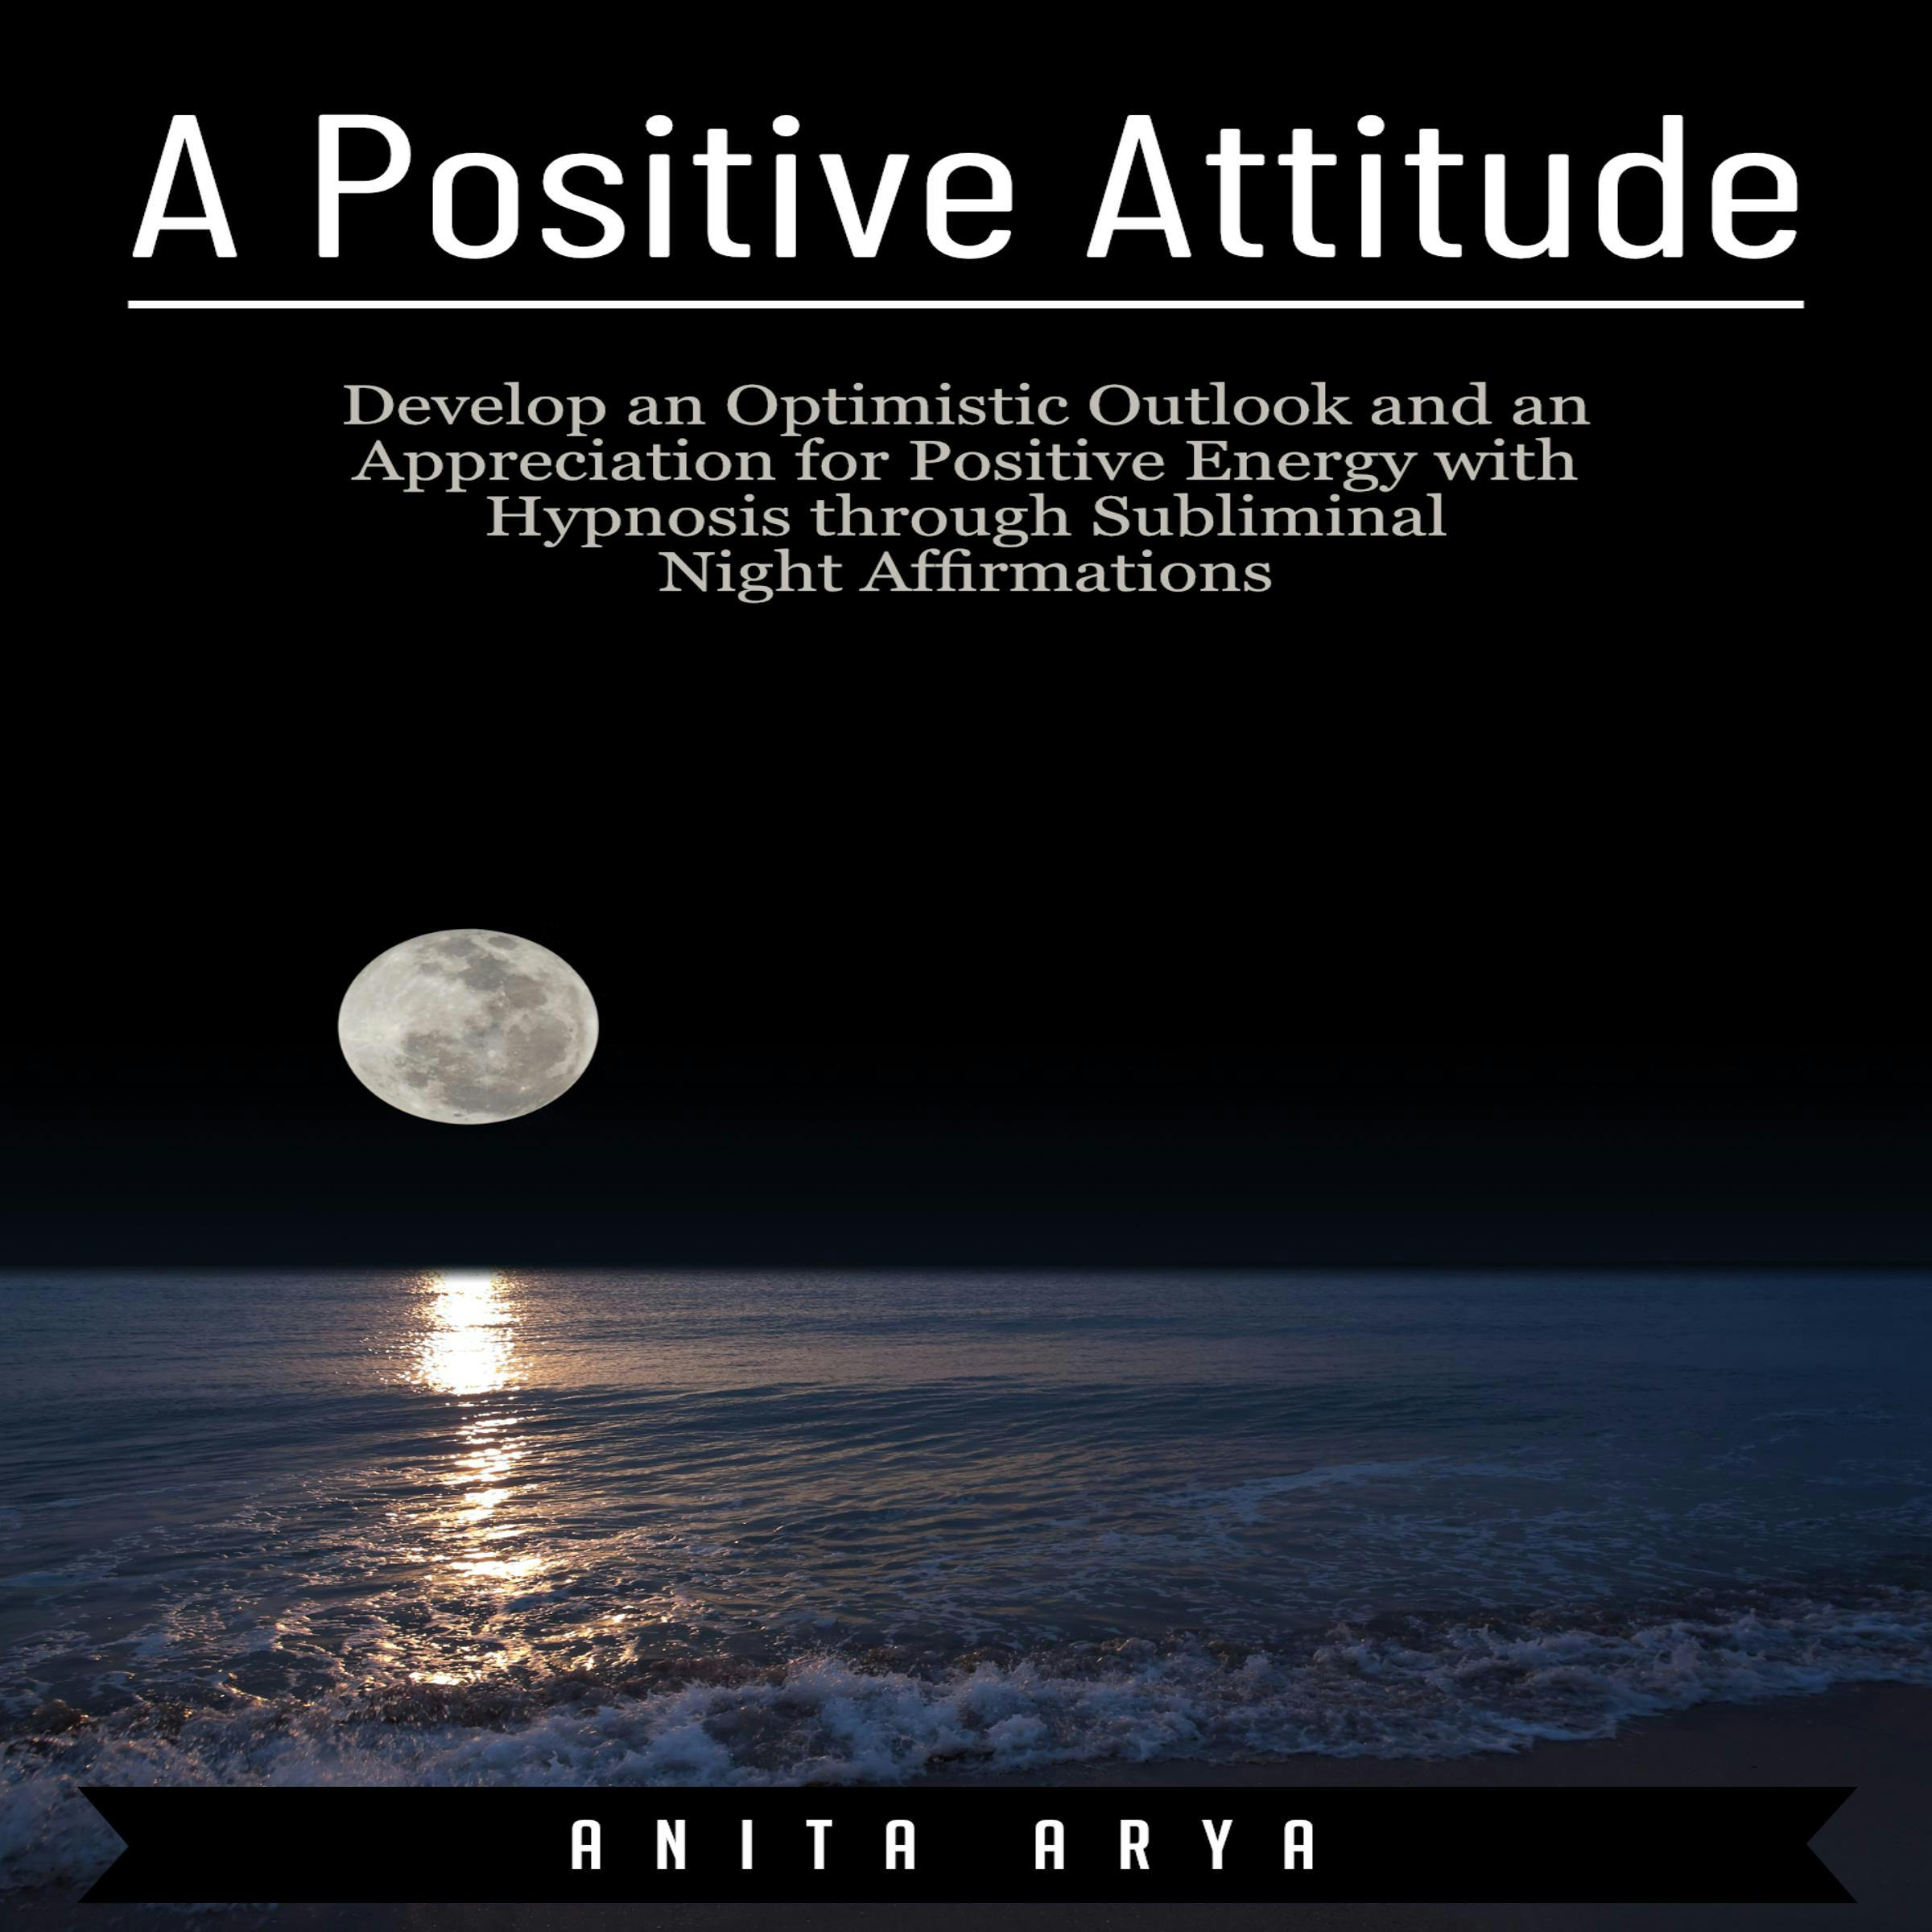 A Positive Attitude: Develop an Optimistic Outlook and an Appreciation for Positive Energy with Hypnosis through Subliminal Night Affirmations - Anita Arya